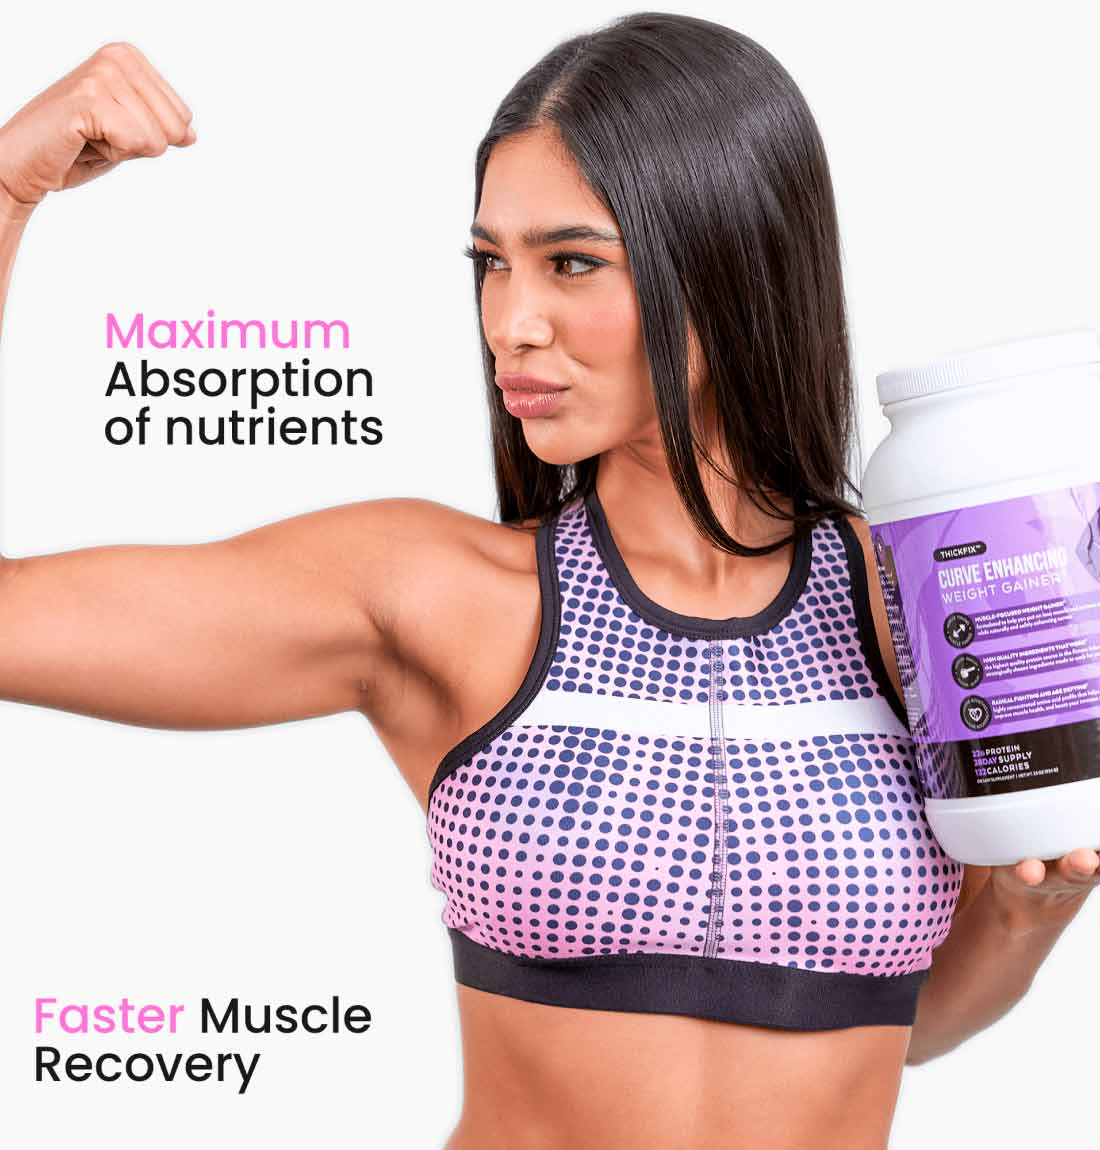 Gluteboost - ThickFix Combo Kit - Natural Curve Enhancement Whey Protein  Shake and Cream - Increase Curves and Muscle